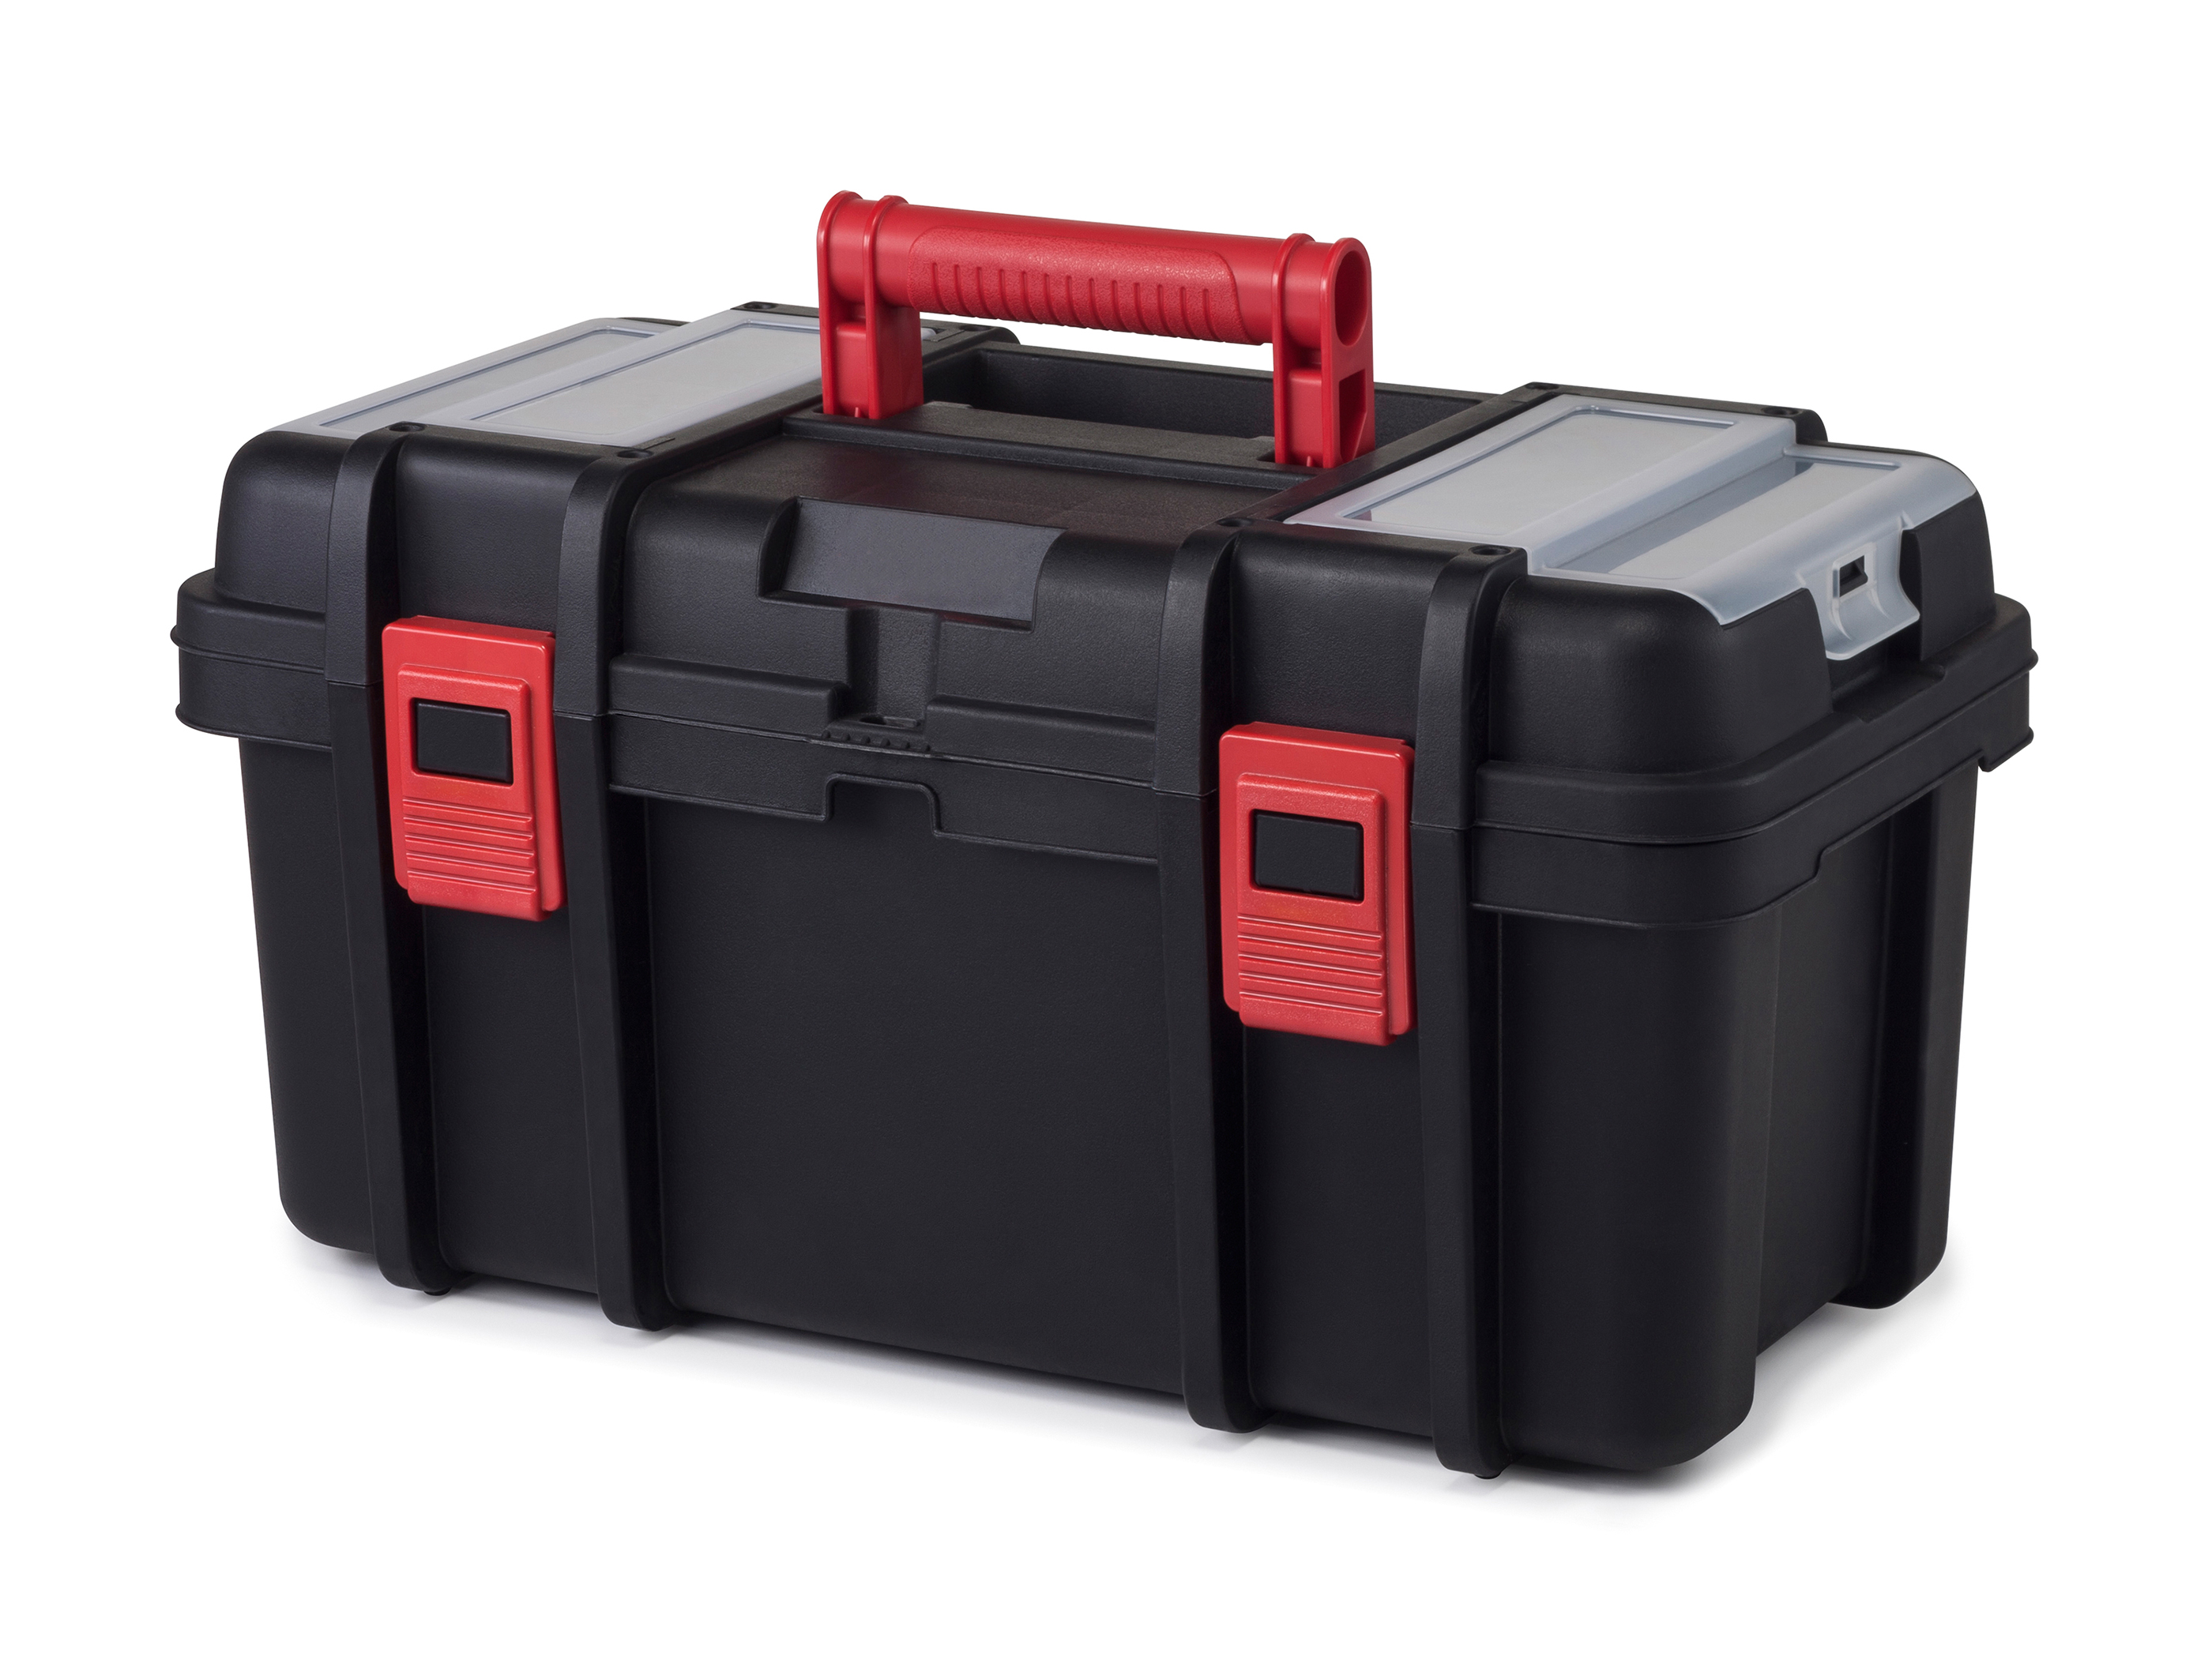 Hyper Tough 19-inch Toolbox, Plastic Tool and Hardware Storage, Black - image 1 of 13